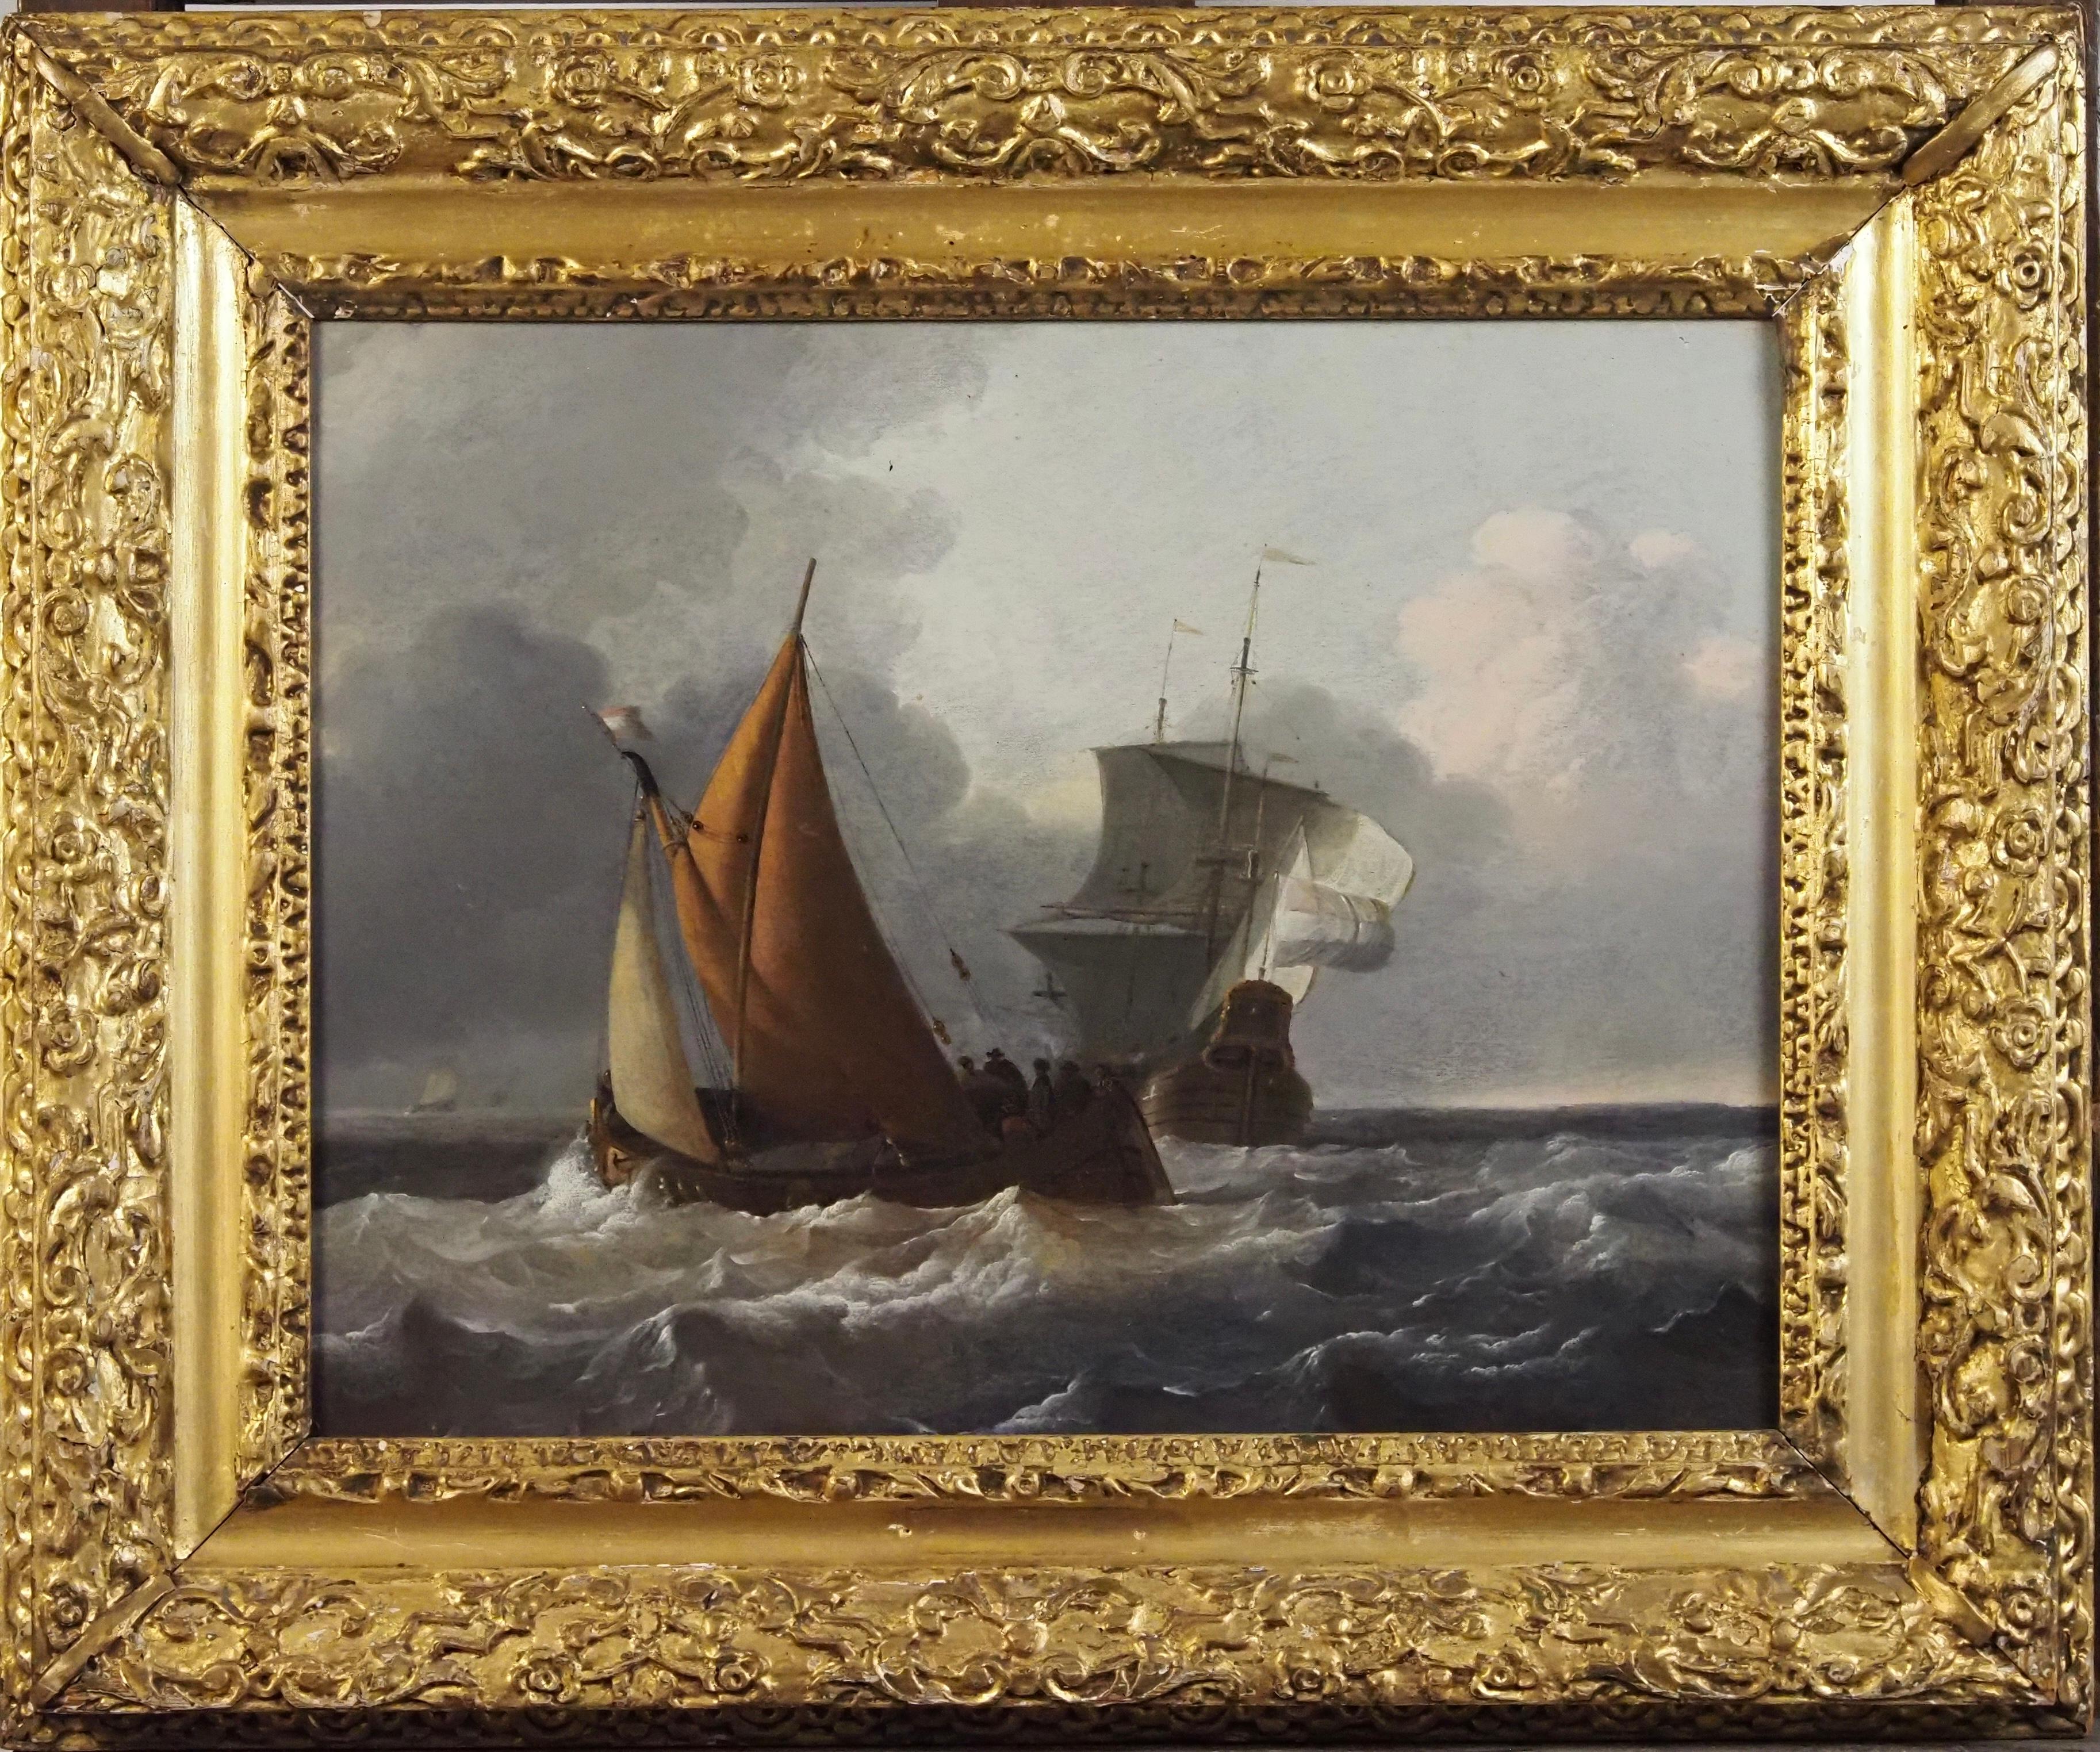 Wigerus Vitringa (Leeuwarden 1657-1721)
Shipping in choppy seas
Oil on panel
Panel Size - 13 1/2 x 17 1/2 in
Framed Size - 20 x 25 in

Provenance
Admiral Sir Lionel Preston;
With Simon C Dickinson;
The Estate of Mrs Althea Lloyd.

The attribution to